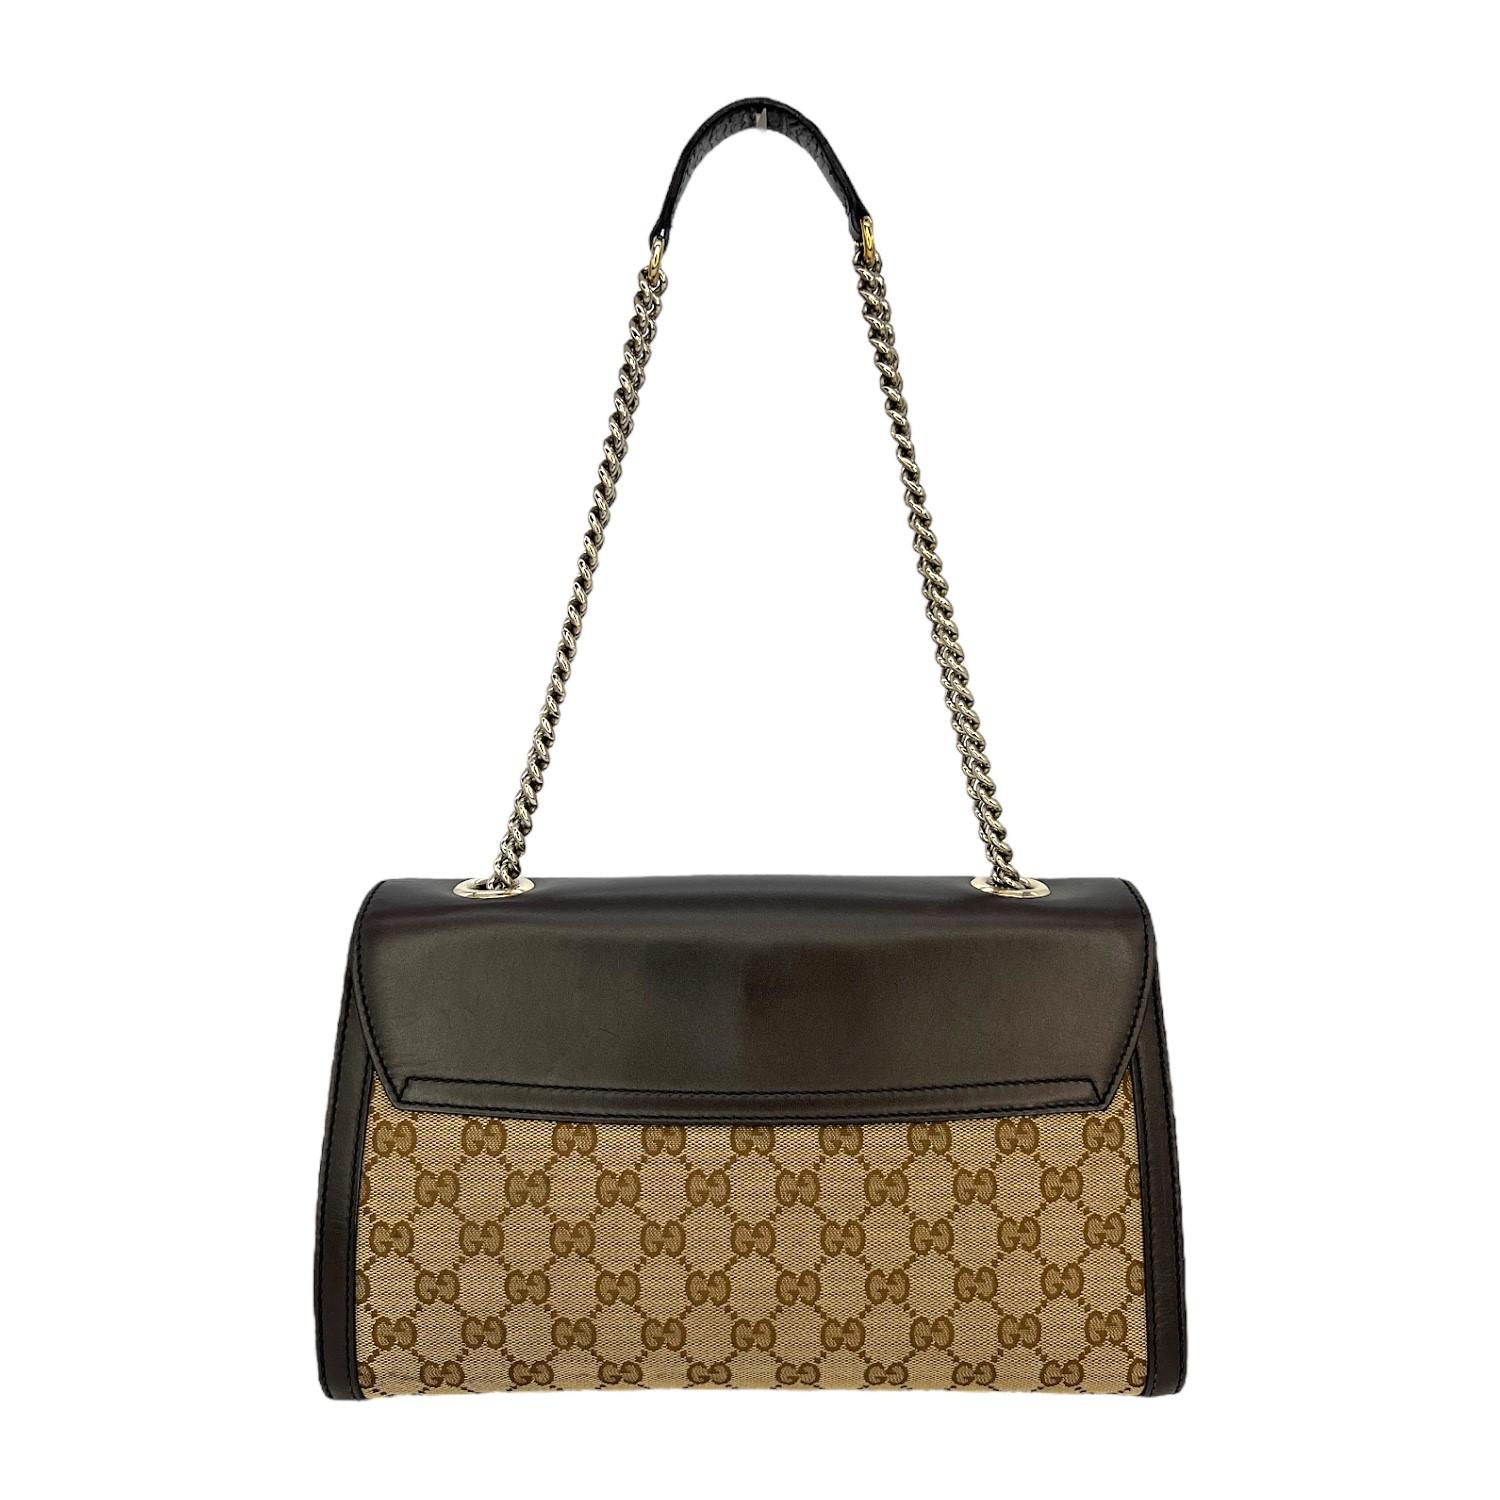 This Gucci GG Supreme Emily Flap Shoulder Bag was made in Italy and it is finely crafted of the classic Gucci GG Supreme canvas exterior with leather trimming and gold-tone hardware features. It has a chain-link and leather shoulder strap. It has a